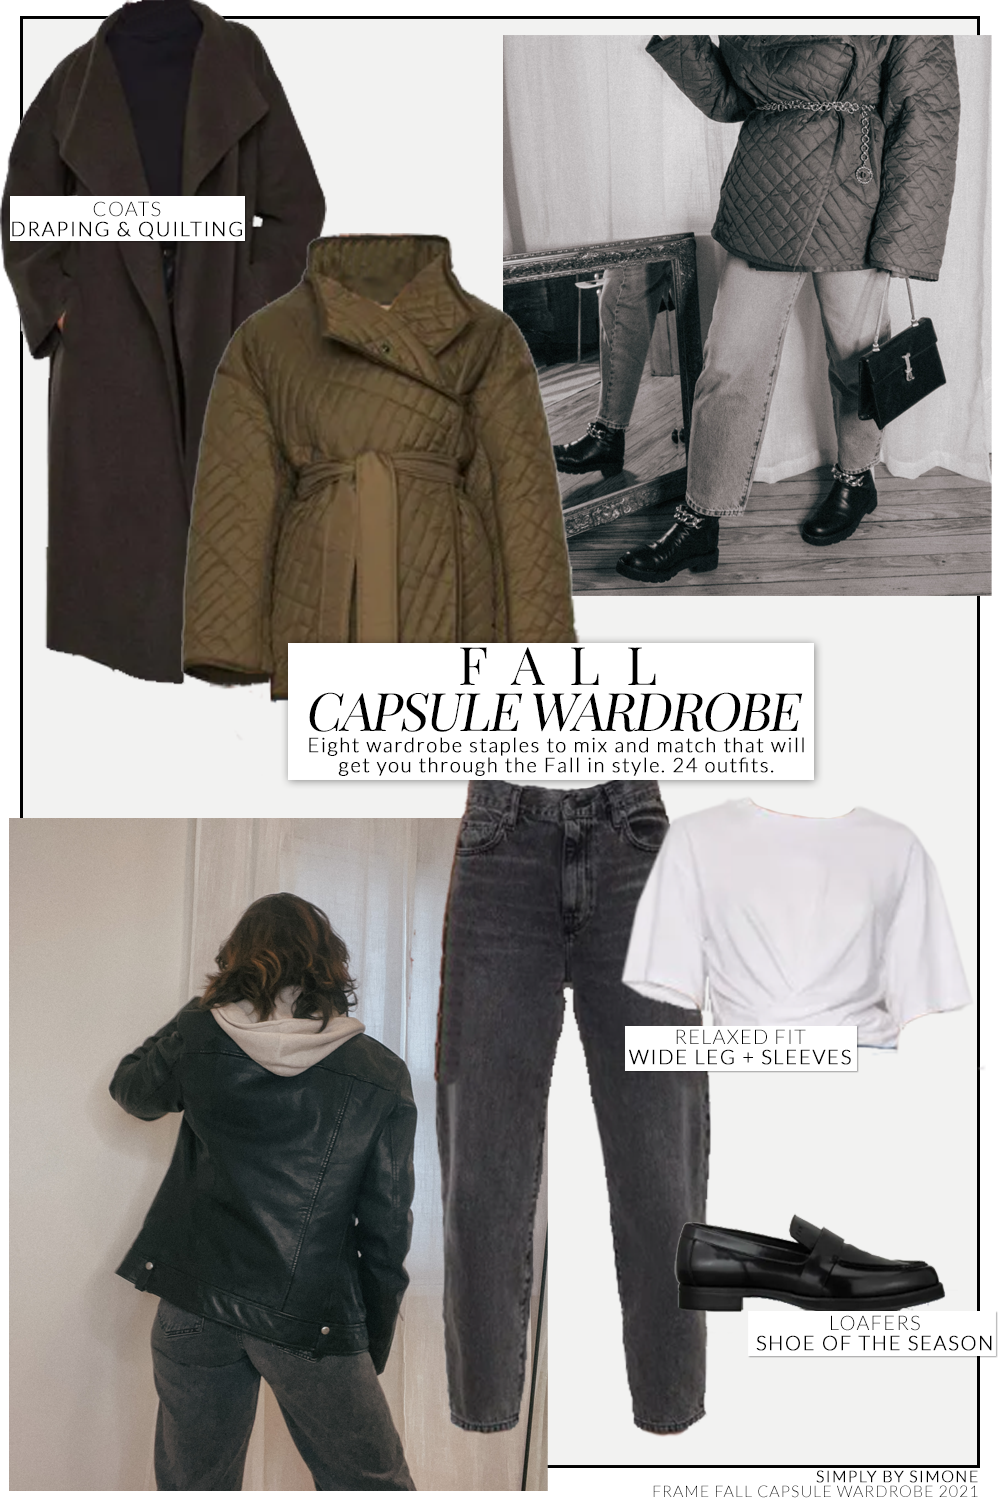 Frame Clothing Fall Capsule Wardrobe | 8 Pieces, 24 Outfits for Fall | How to Build a Capsule Wardrobe | Frame Clothing Fall Clothes | Outfit Inspiration | 24 Fall Weather Outfit Ideas | Fall Vacation Packing Guide | Frame Clothing Fall Capsule Wardrobe - What To Wear this Fall 2021 - Simply by Simone